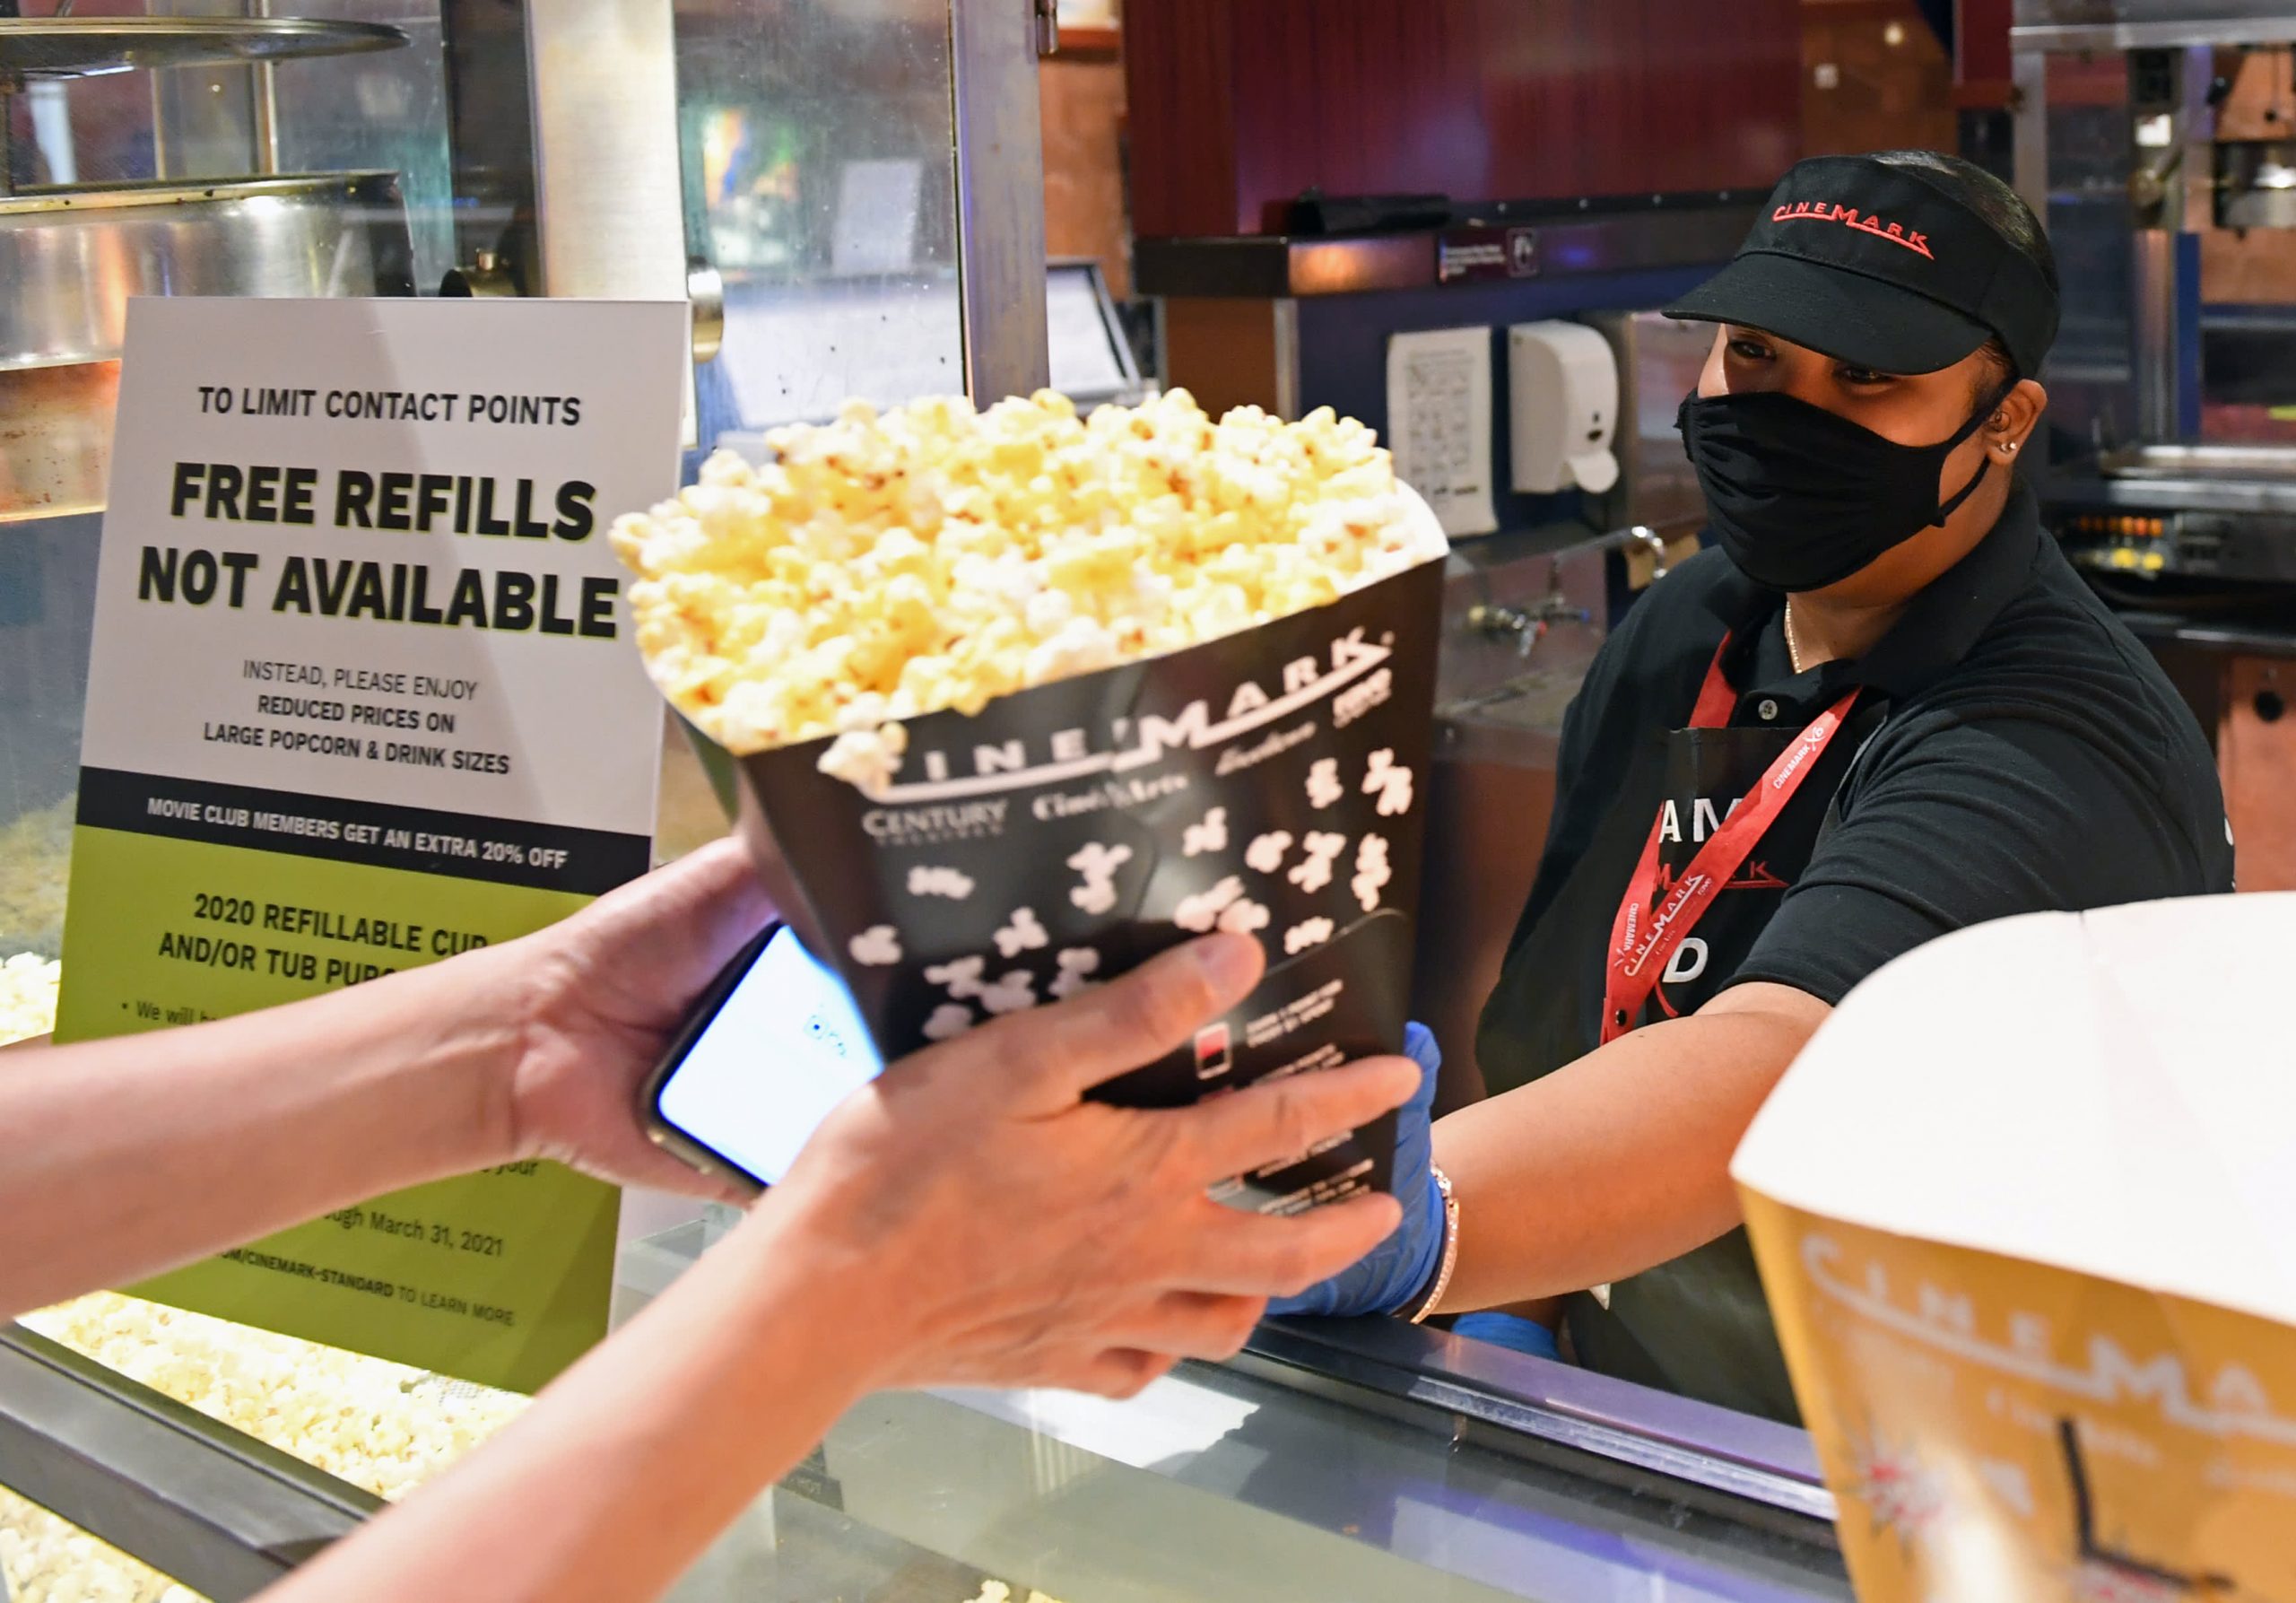 New popcorn business won’t be a gamechanger’ for AMC, says Cinemark CEO